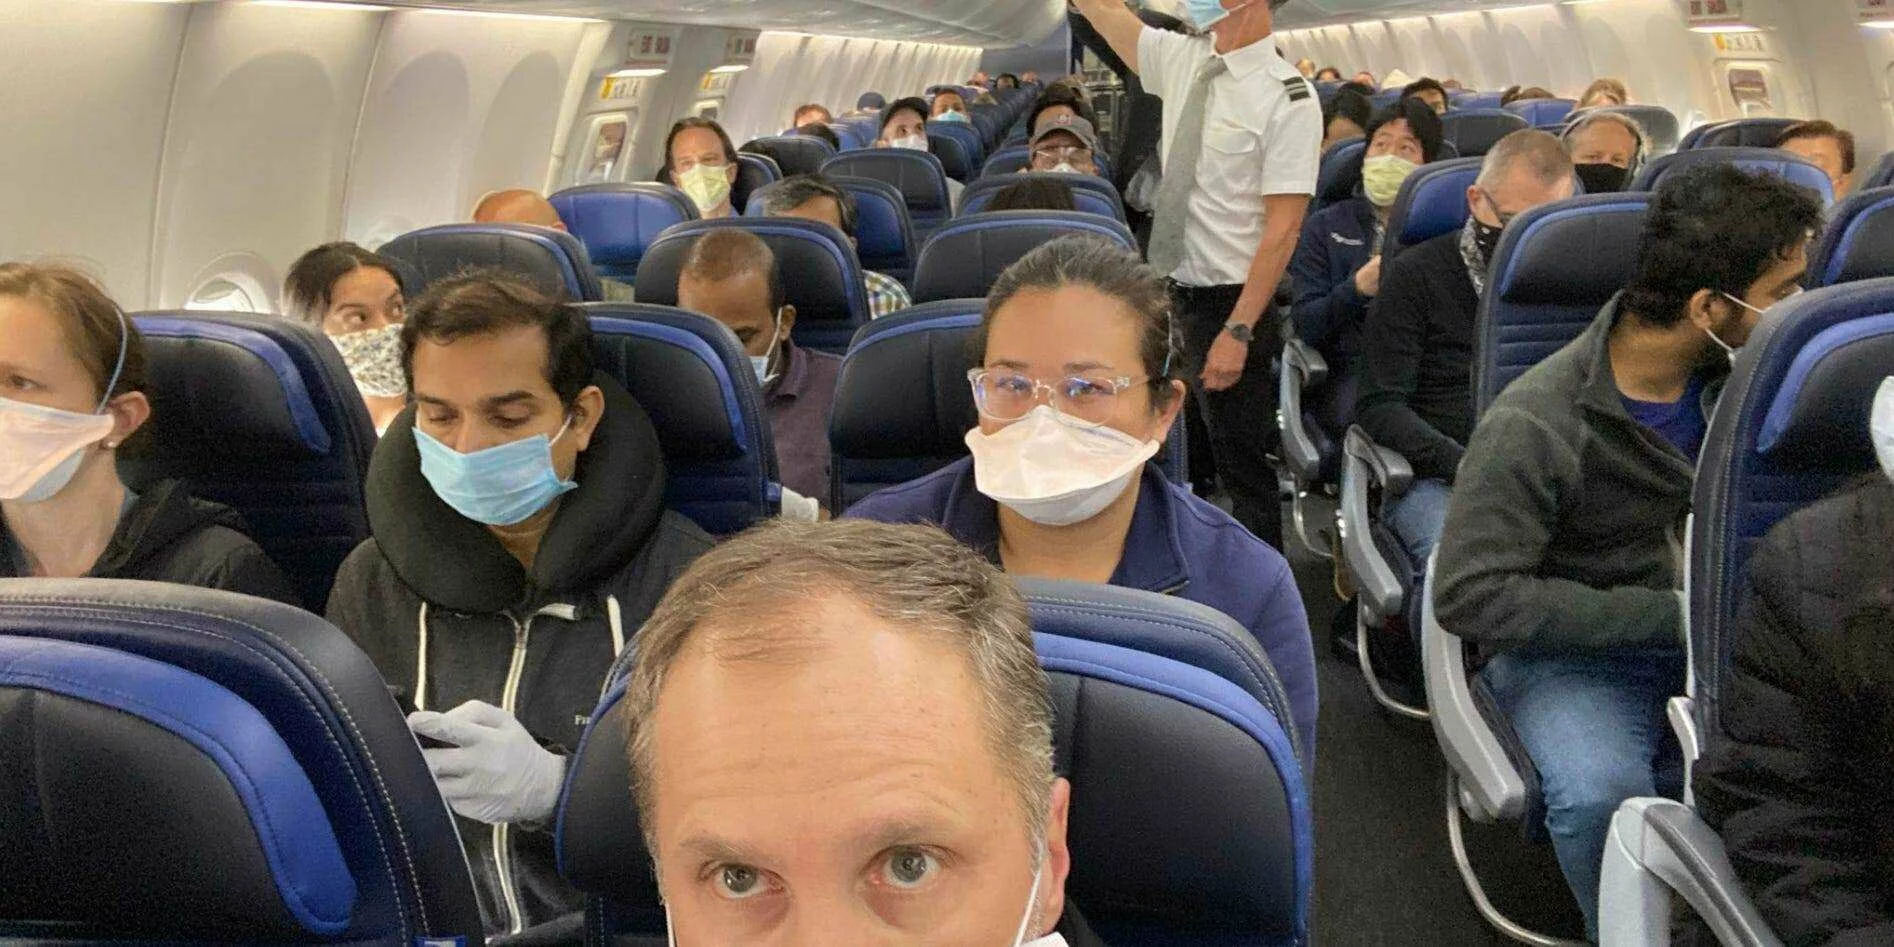 United says it won't guarantee empty middle seats on its aircrafts after a San Francisco doctor tweeted a photo of a nearly-full flight